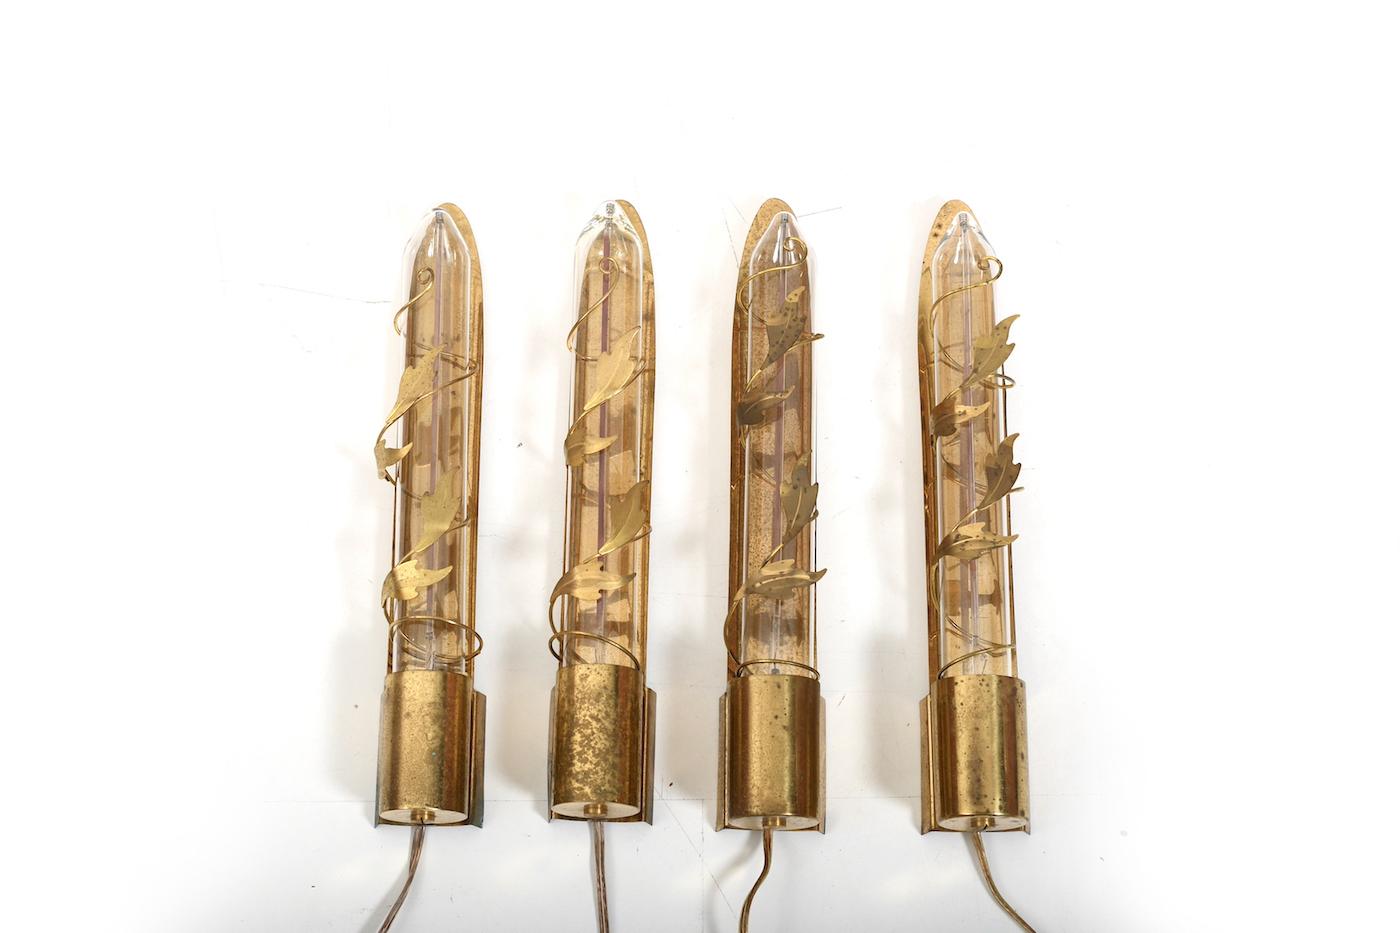 Set of 4 Art Deco wall lamps. Made in brass with leaf decor and the old Phillips glass bulbs. In original condition and good quality. Denmark 1920s-1930s. Price is for the whole lamps.